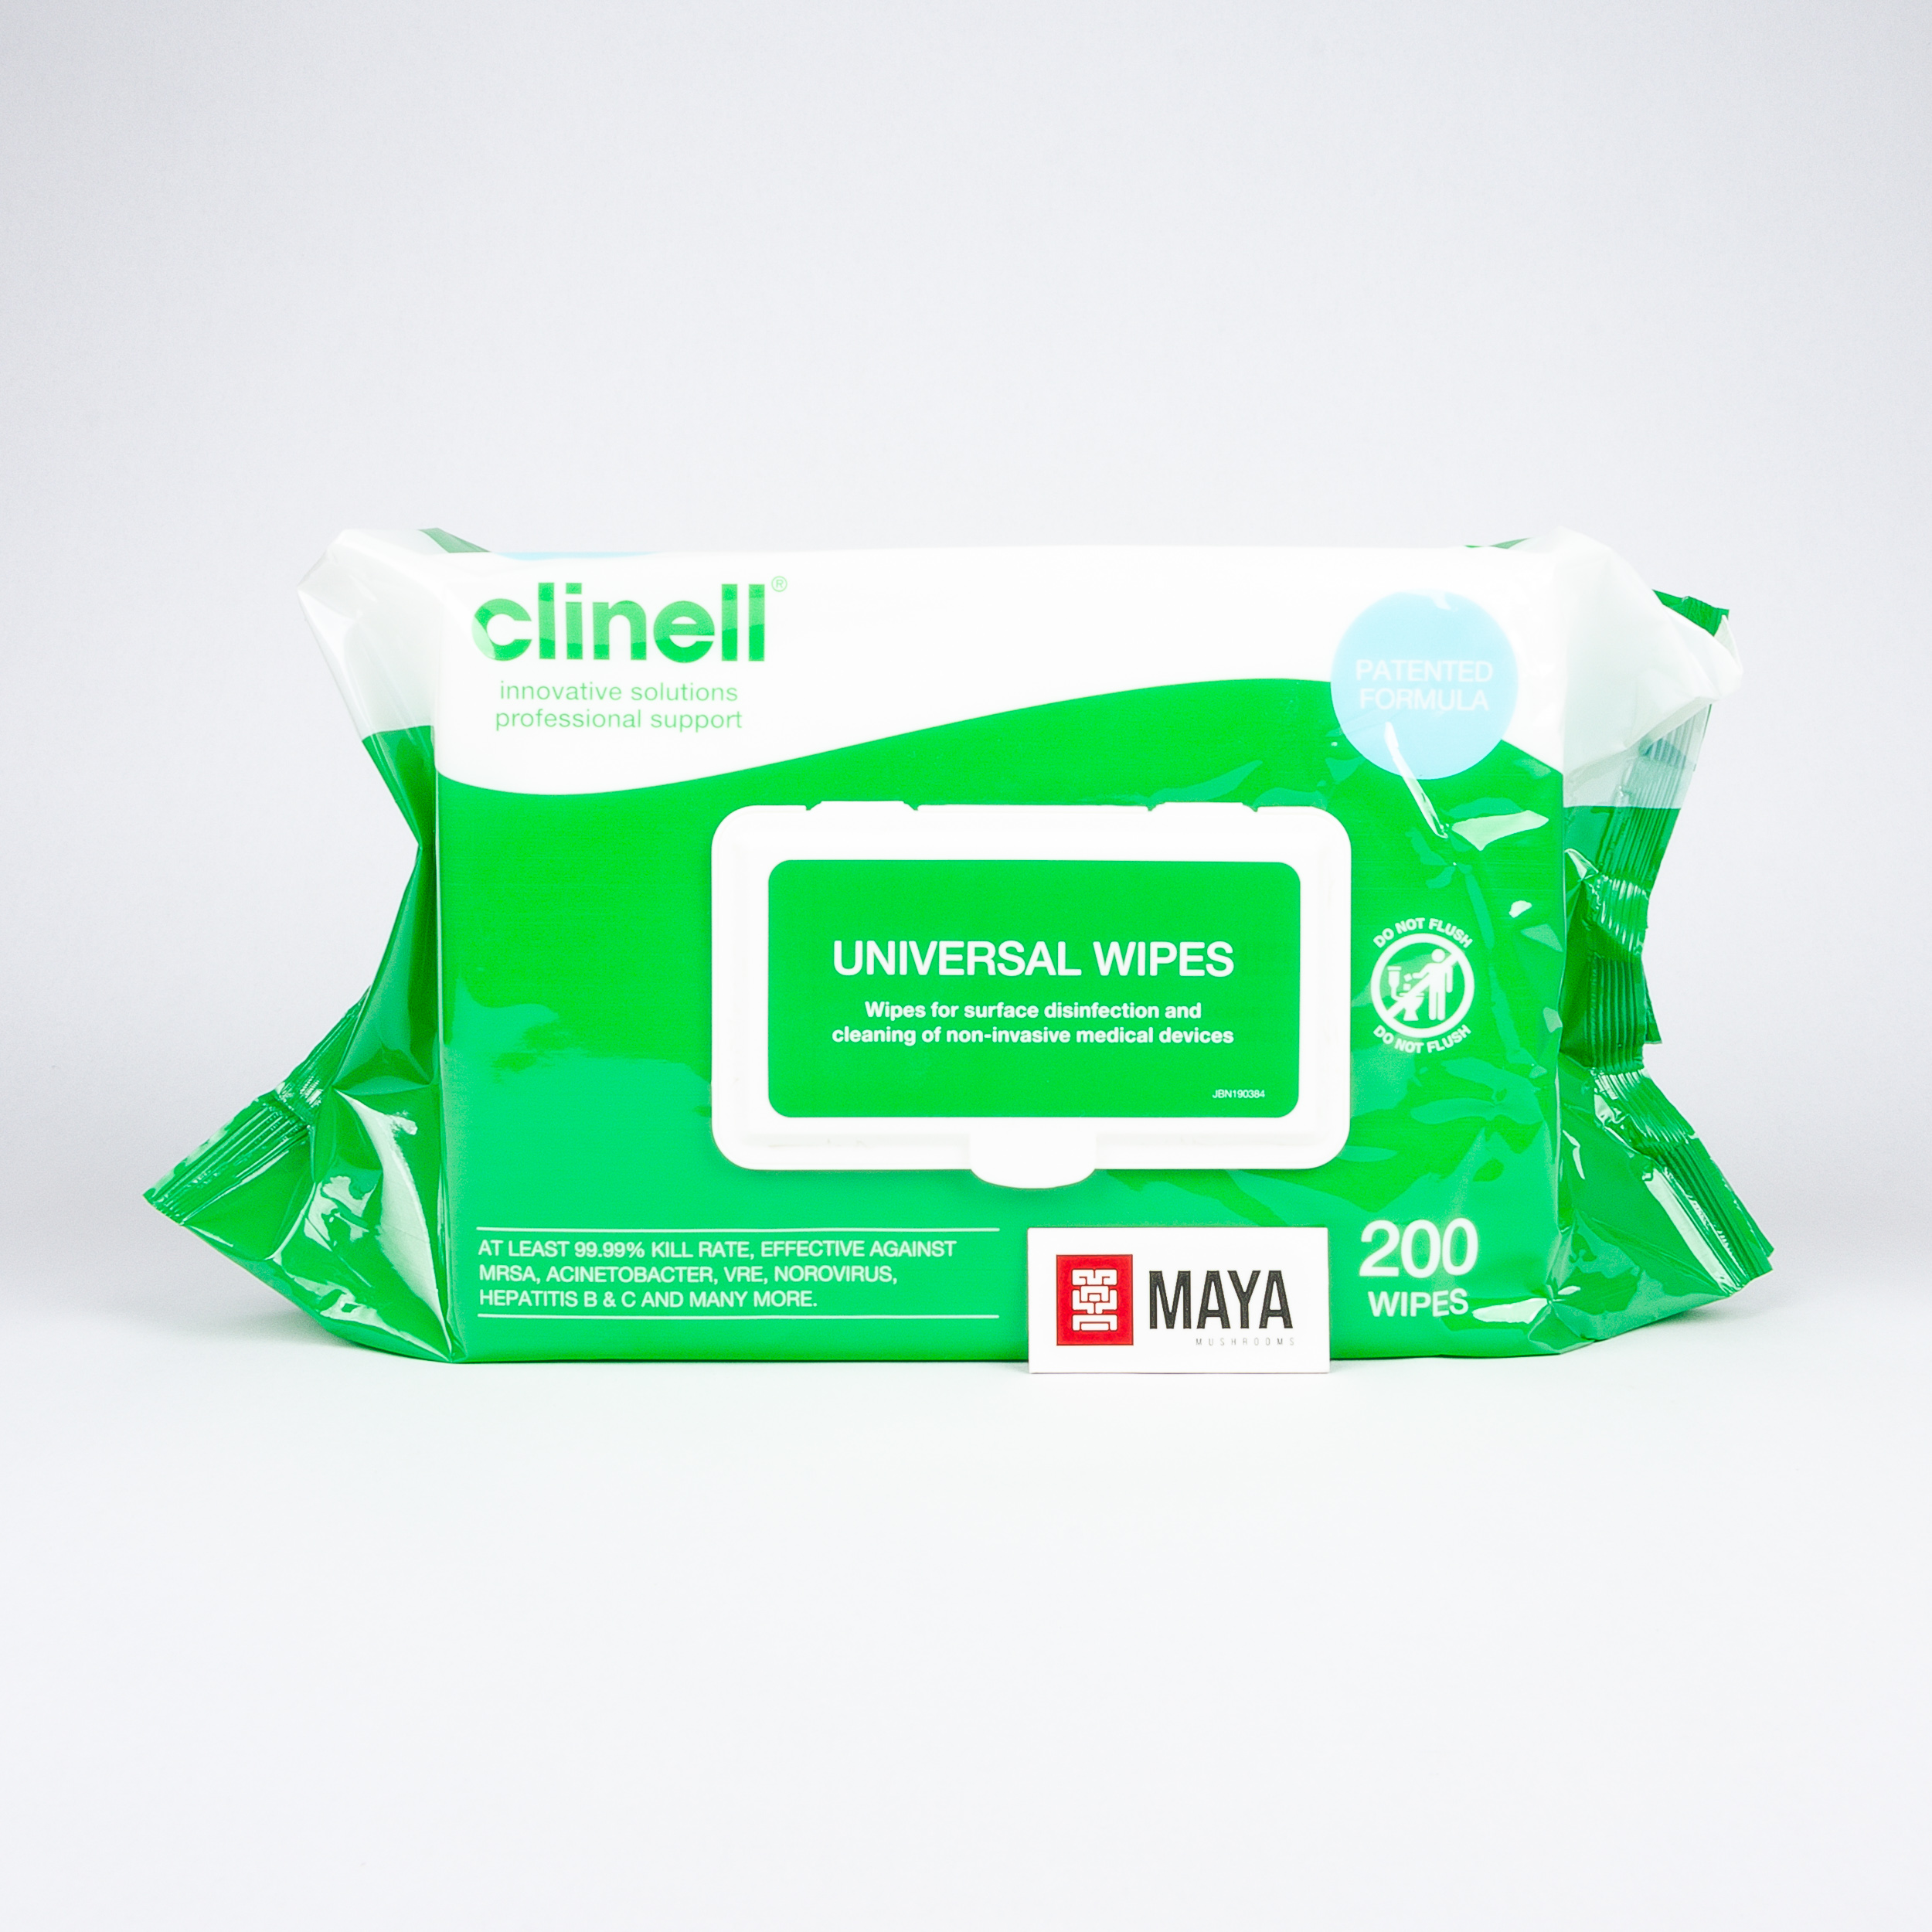 Clinell Universal Wipes, 200 quantity. Top View